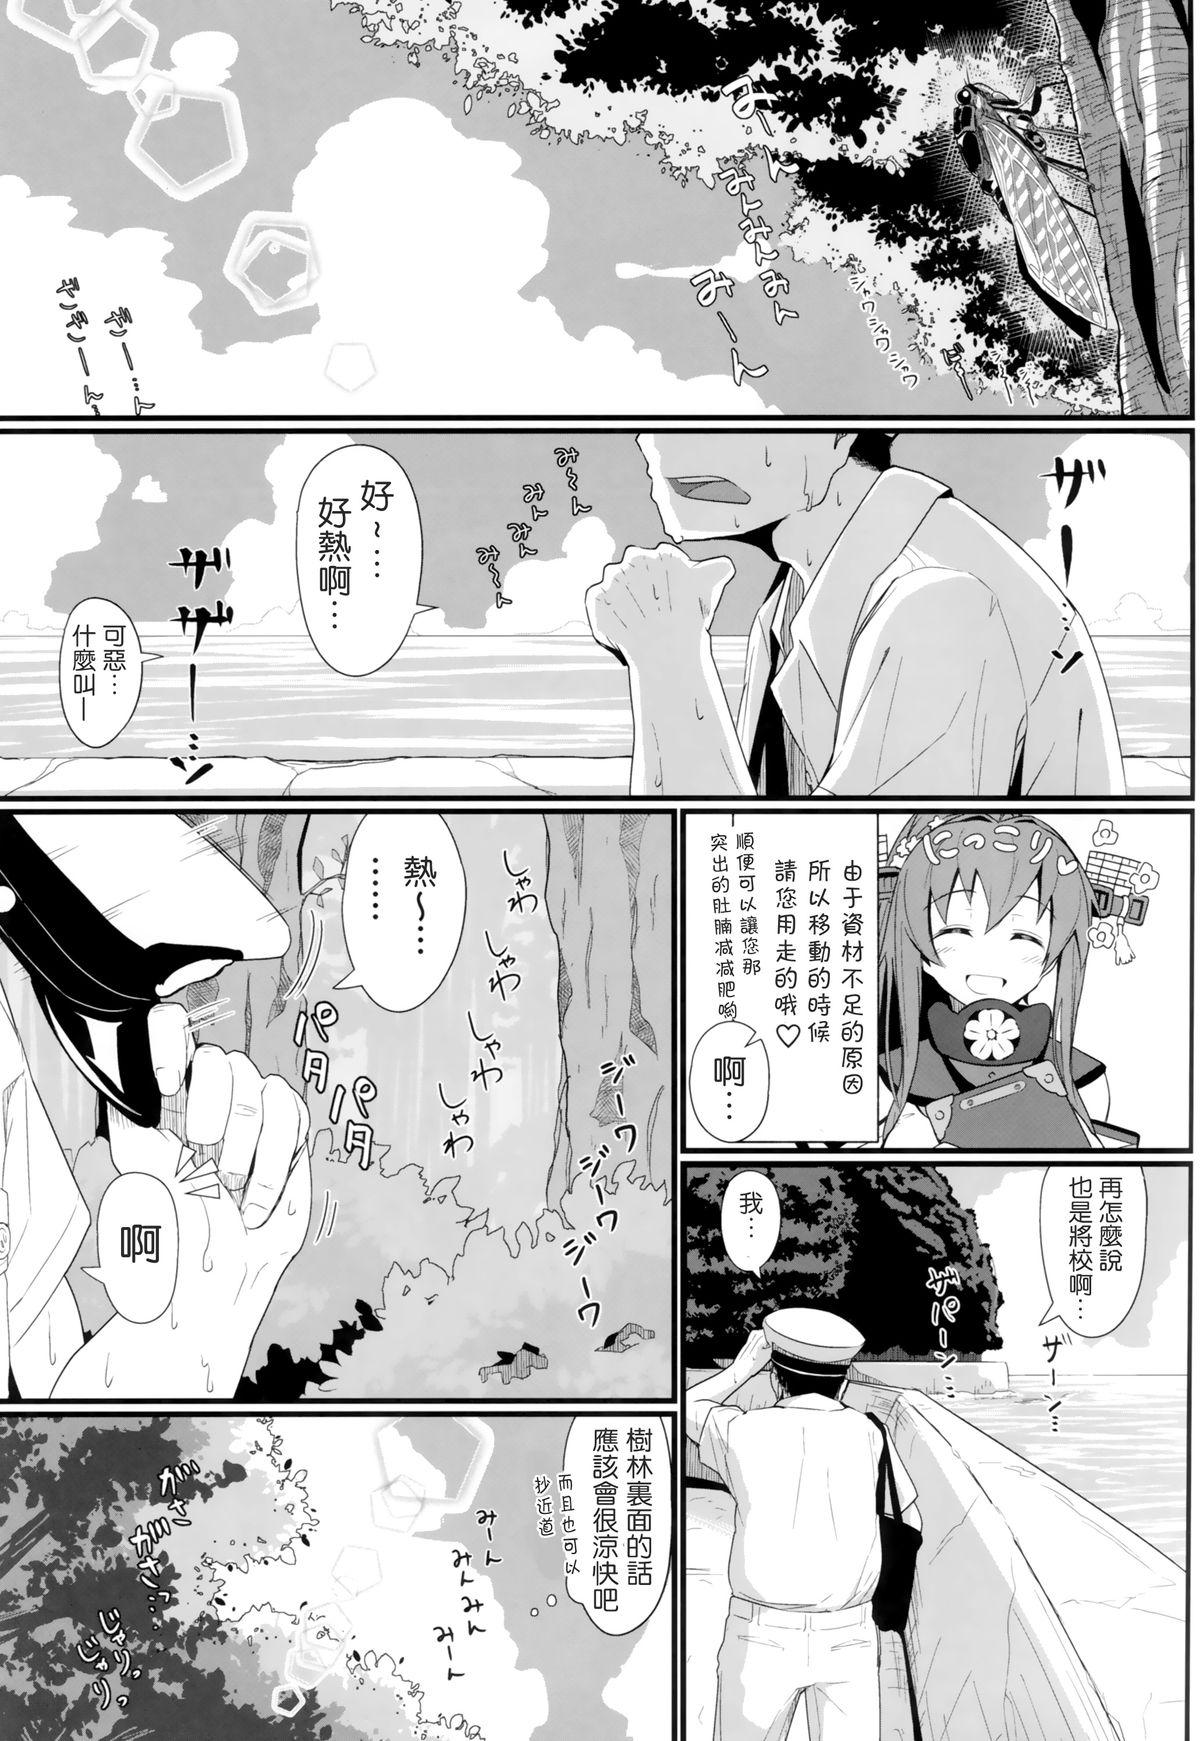 Buttfucking GIRLFriend's 6 - Kantai collection Monstercock - Page 2